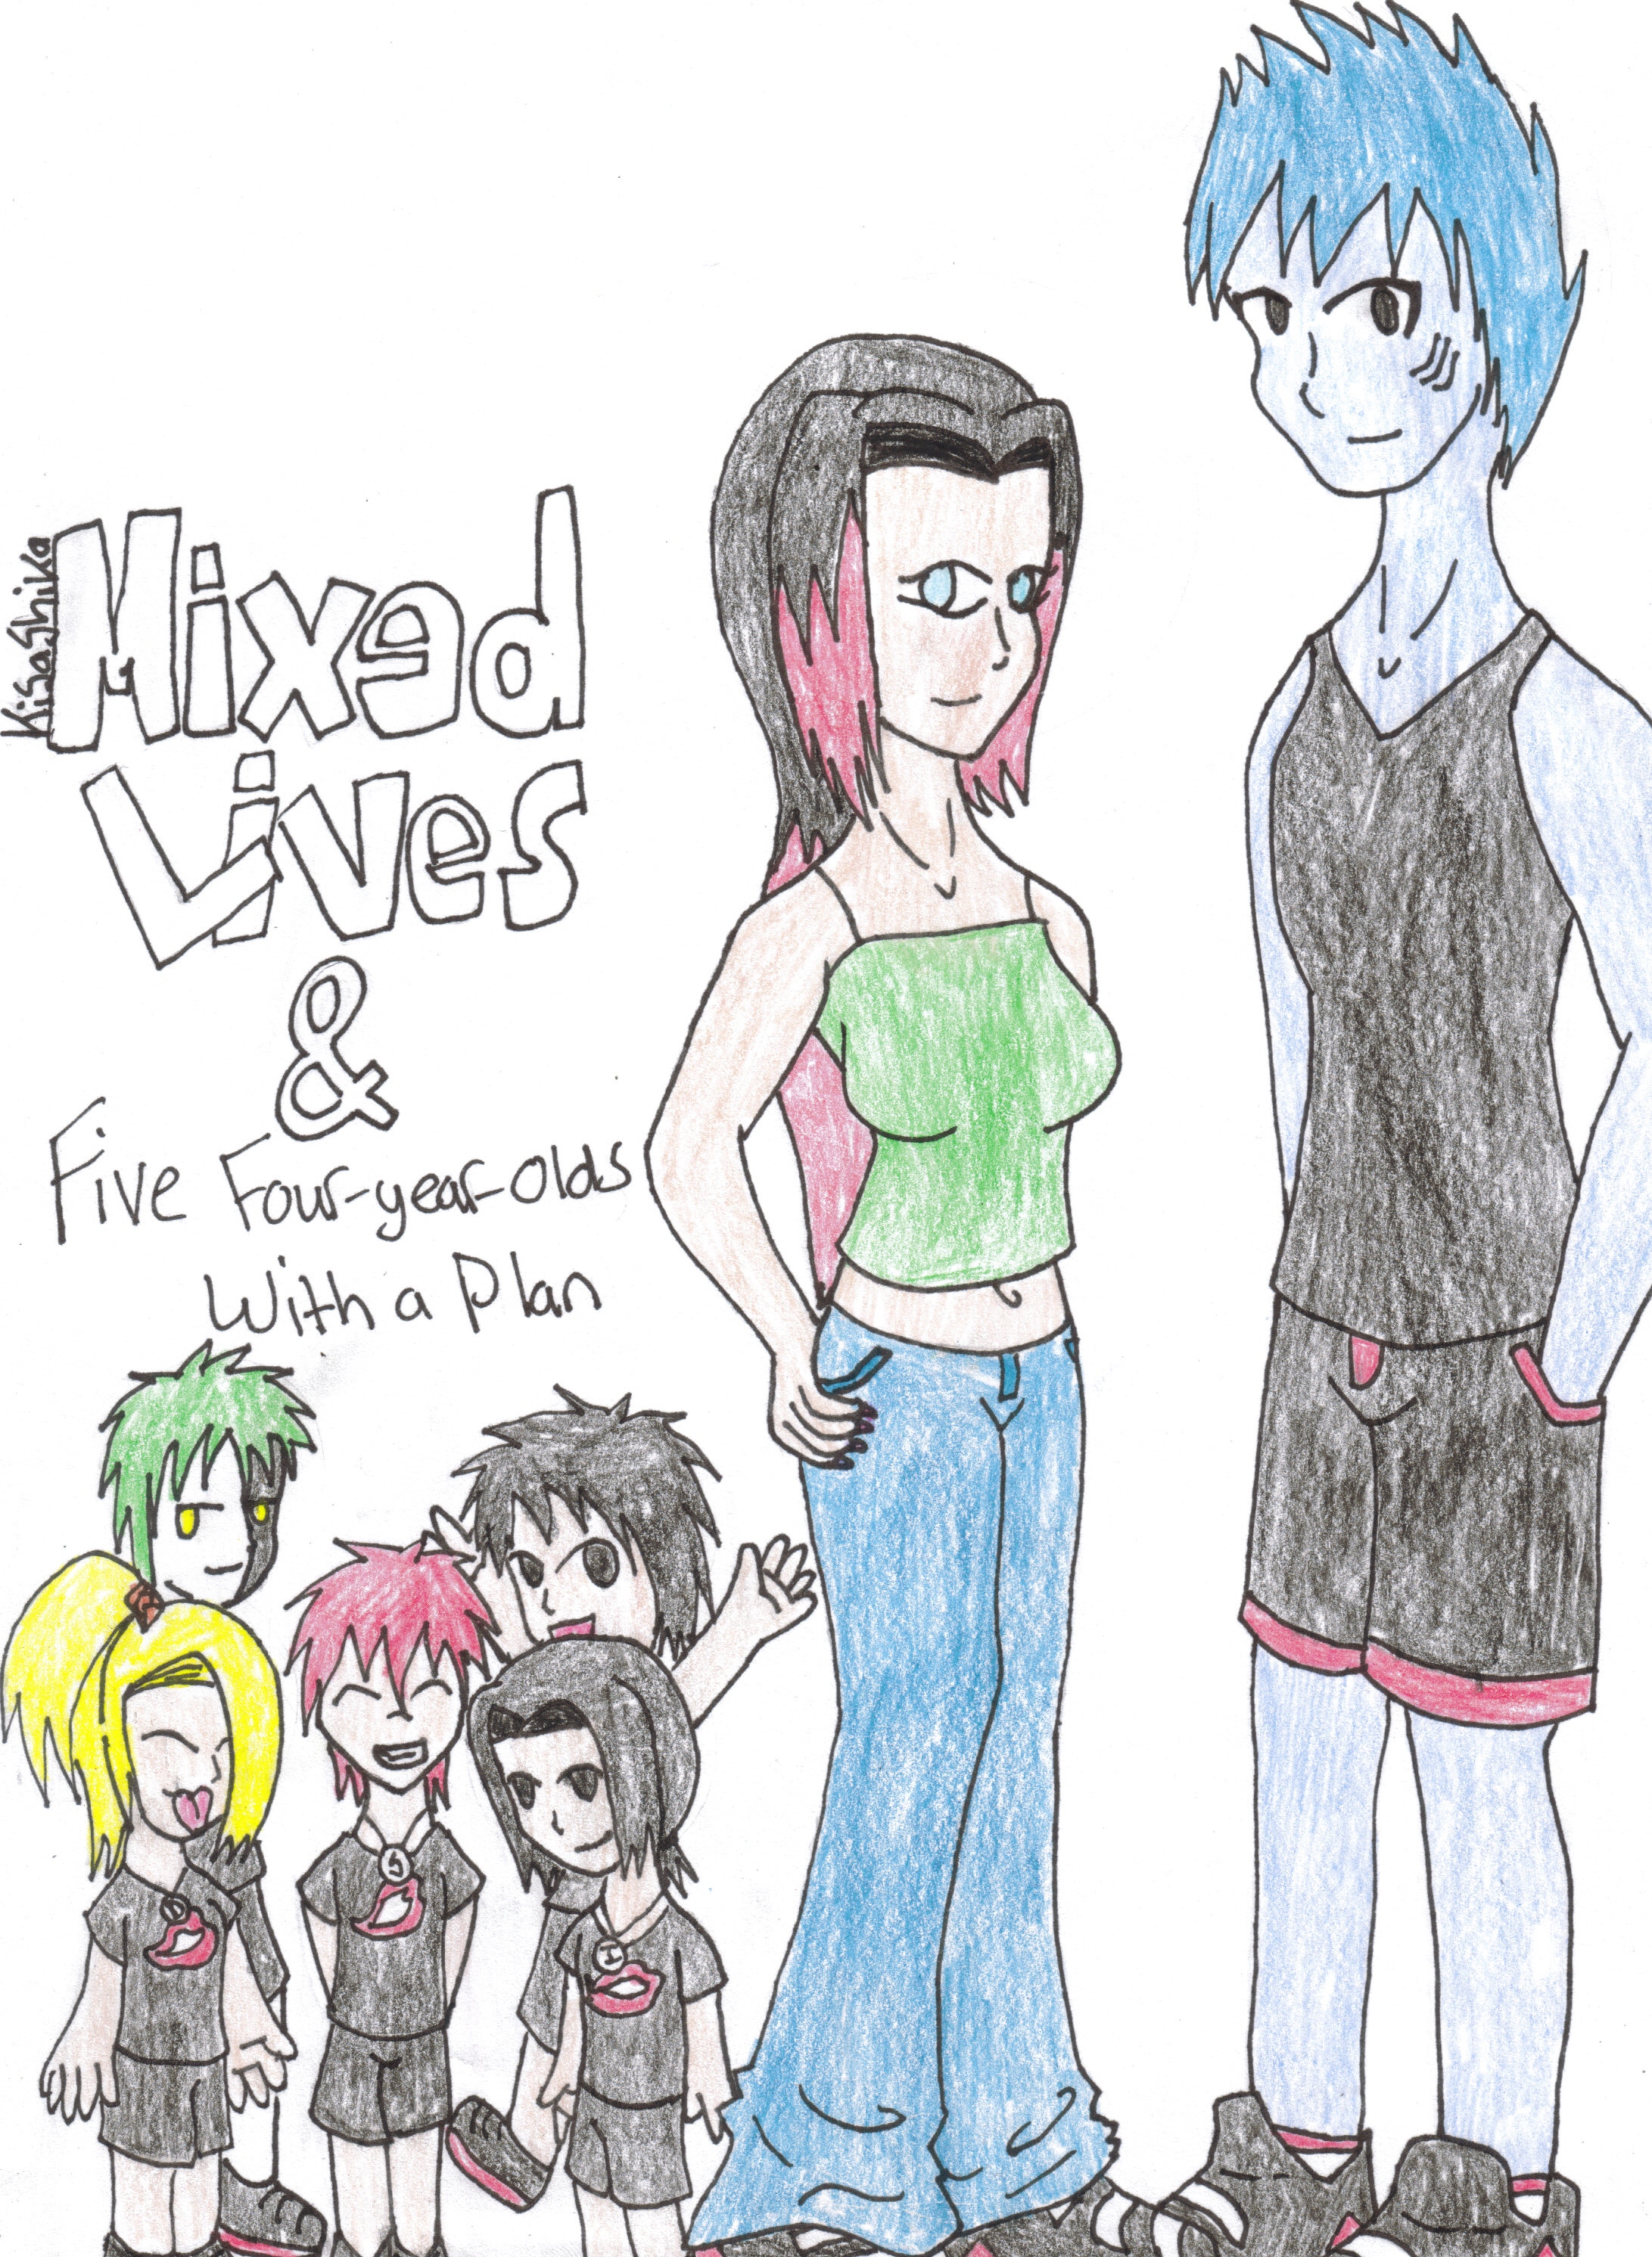 Mixed lives and Five fouryearolds with a plan by KisaShika